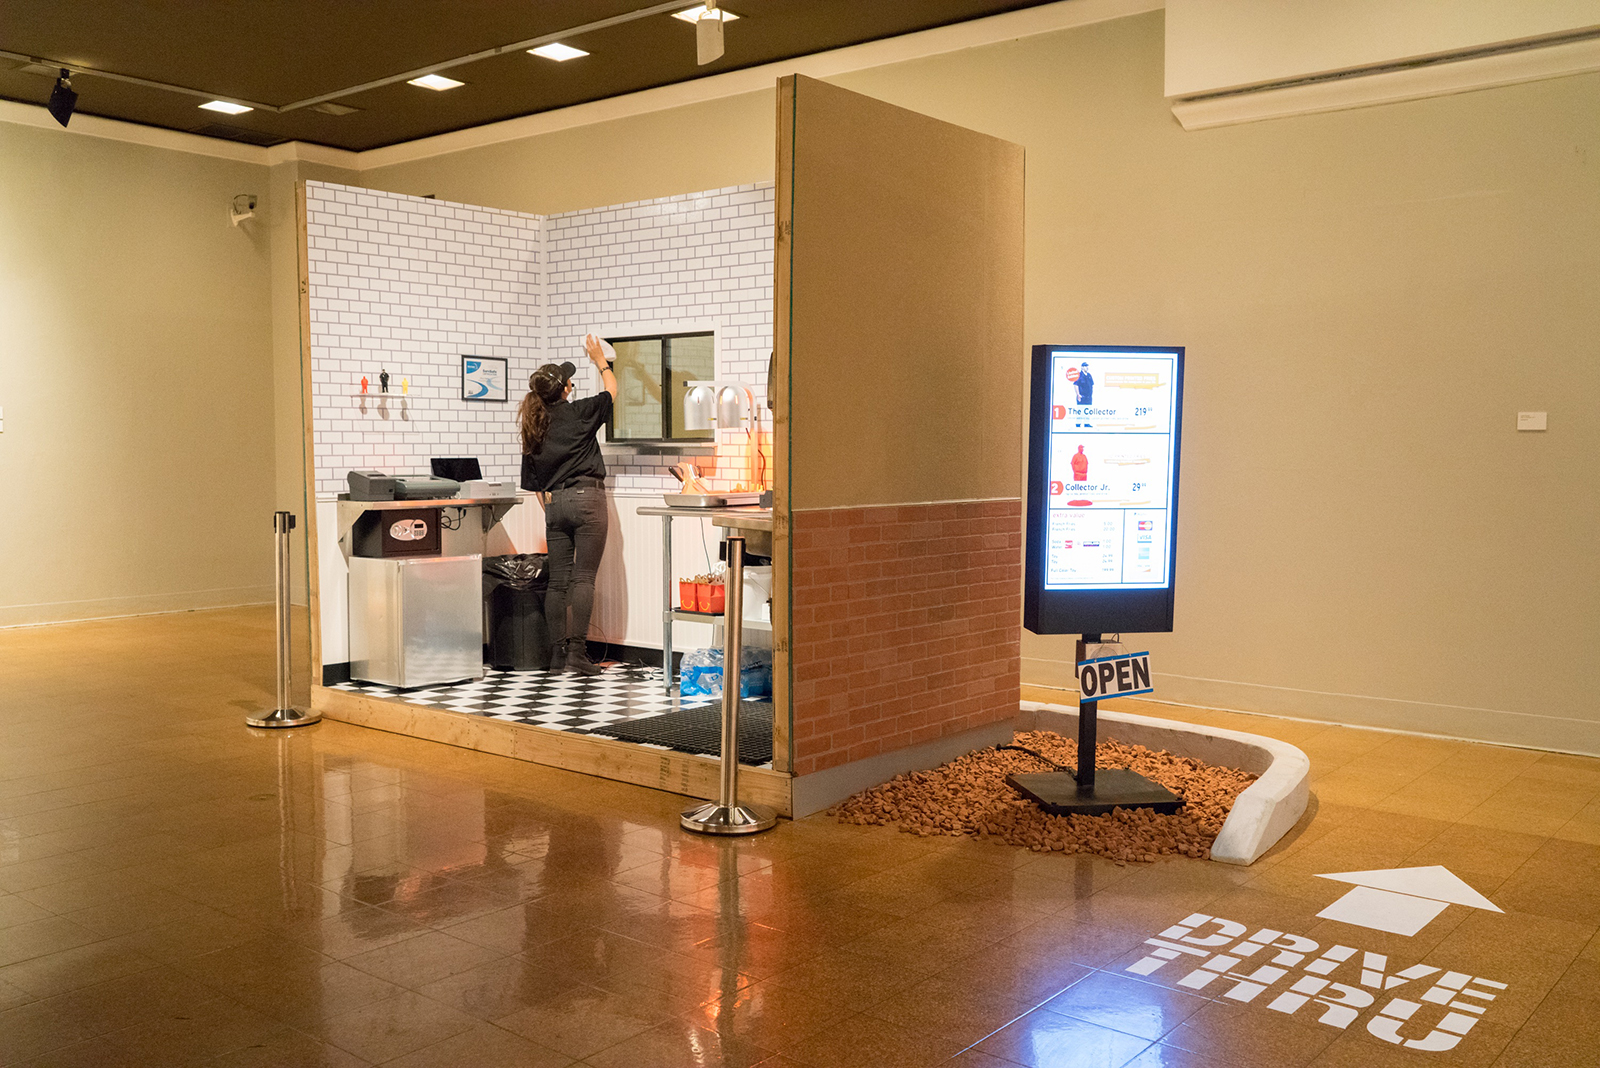 Image of Oliver Padilla’s Product of the American Dream installation. A small fast-food restaurant drive-thru with a three-sided white tile kitchen is constructed in the gallery. A person in a black restaurant uniform wipes down the tiled walls of the room.